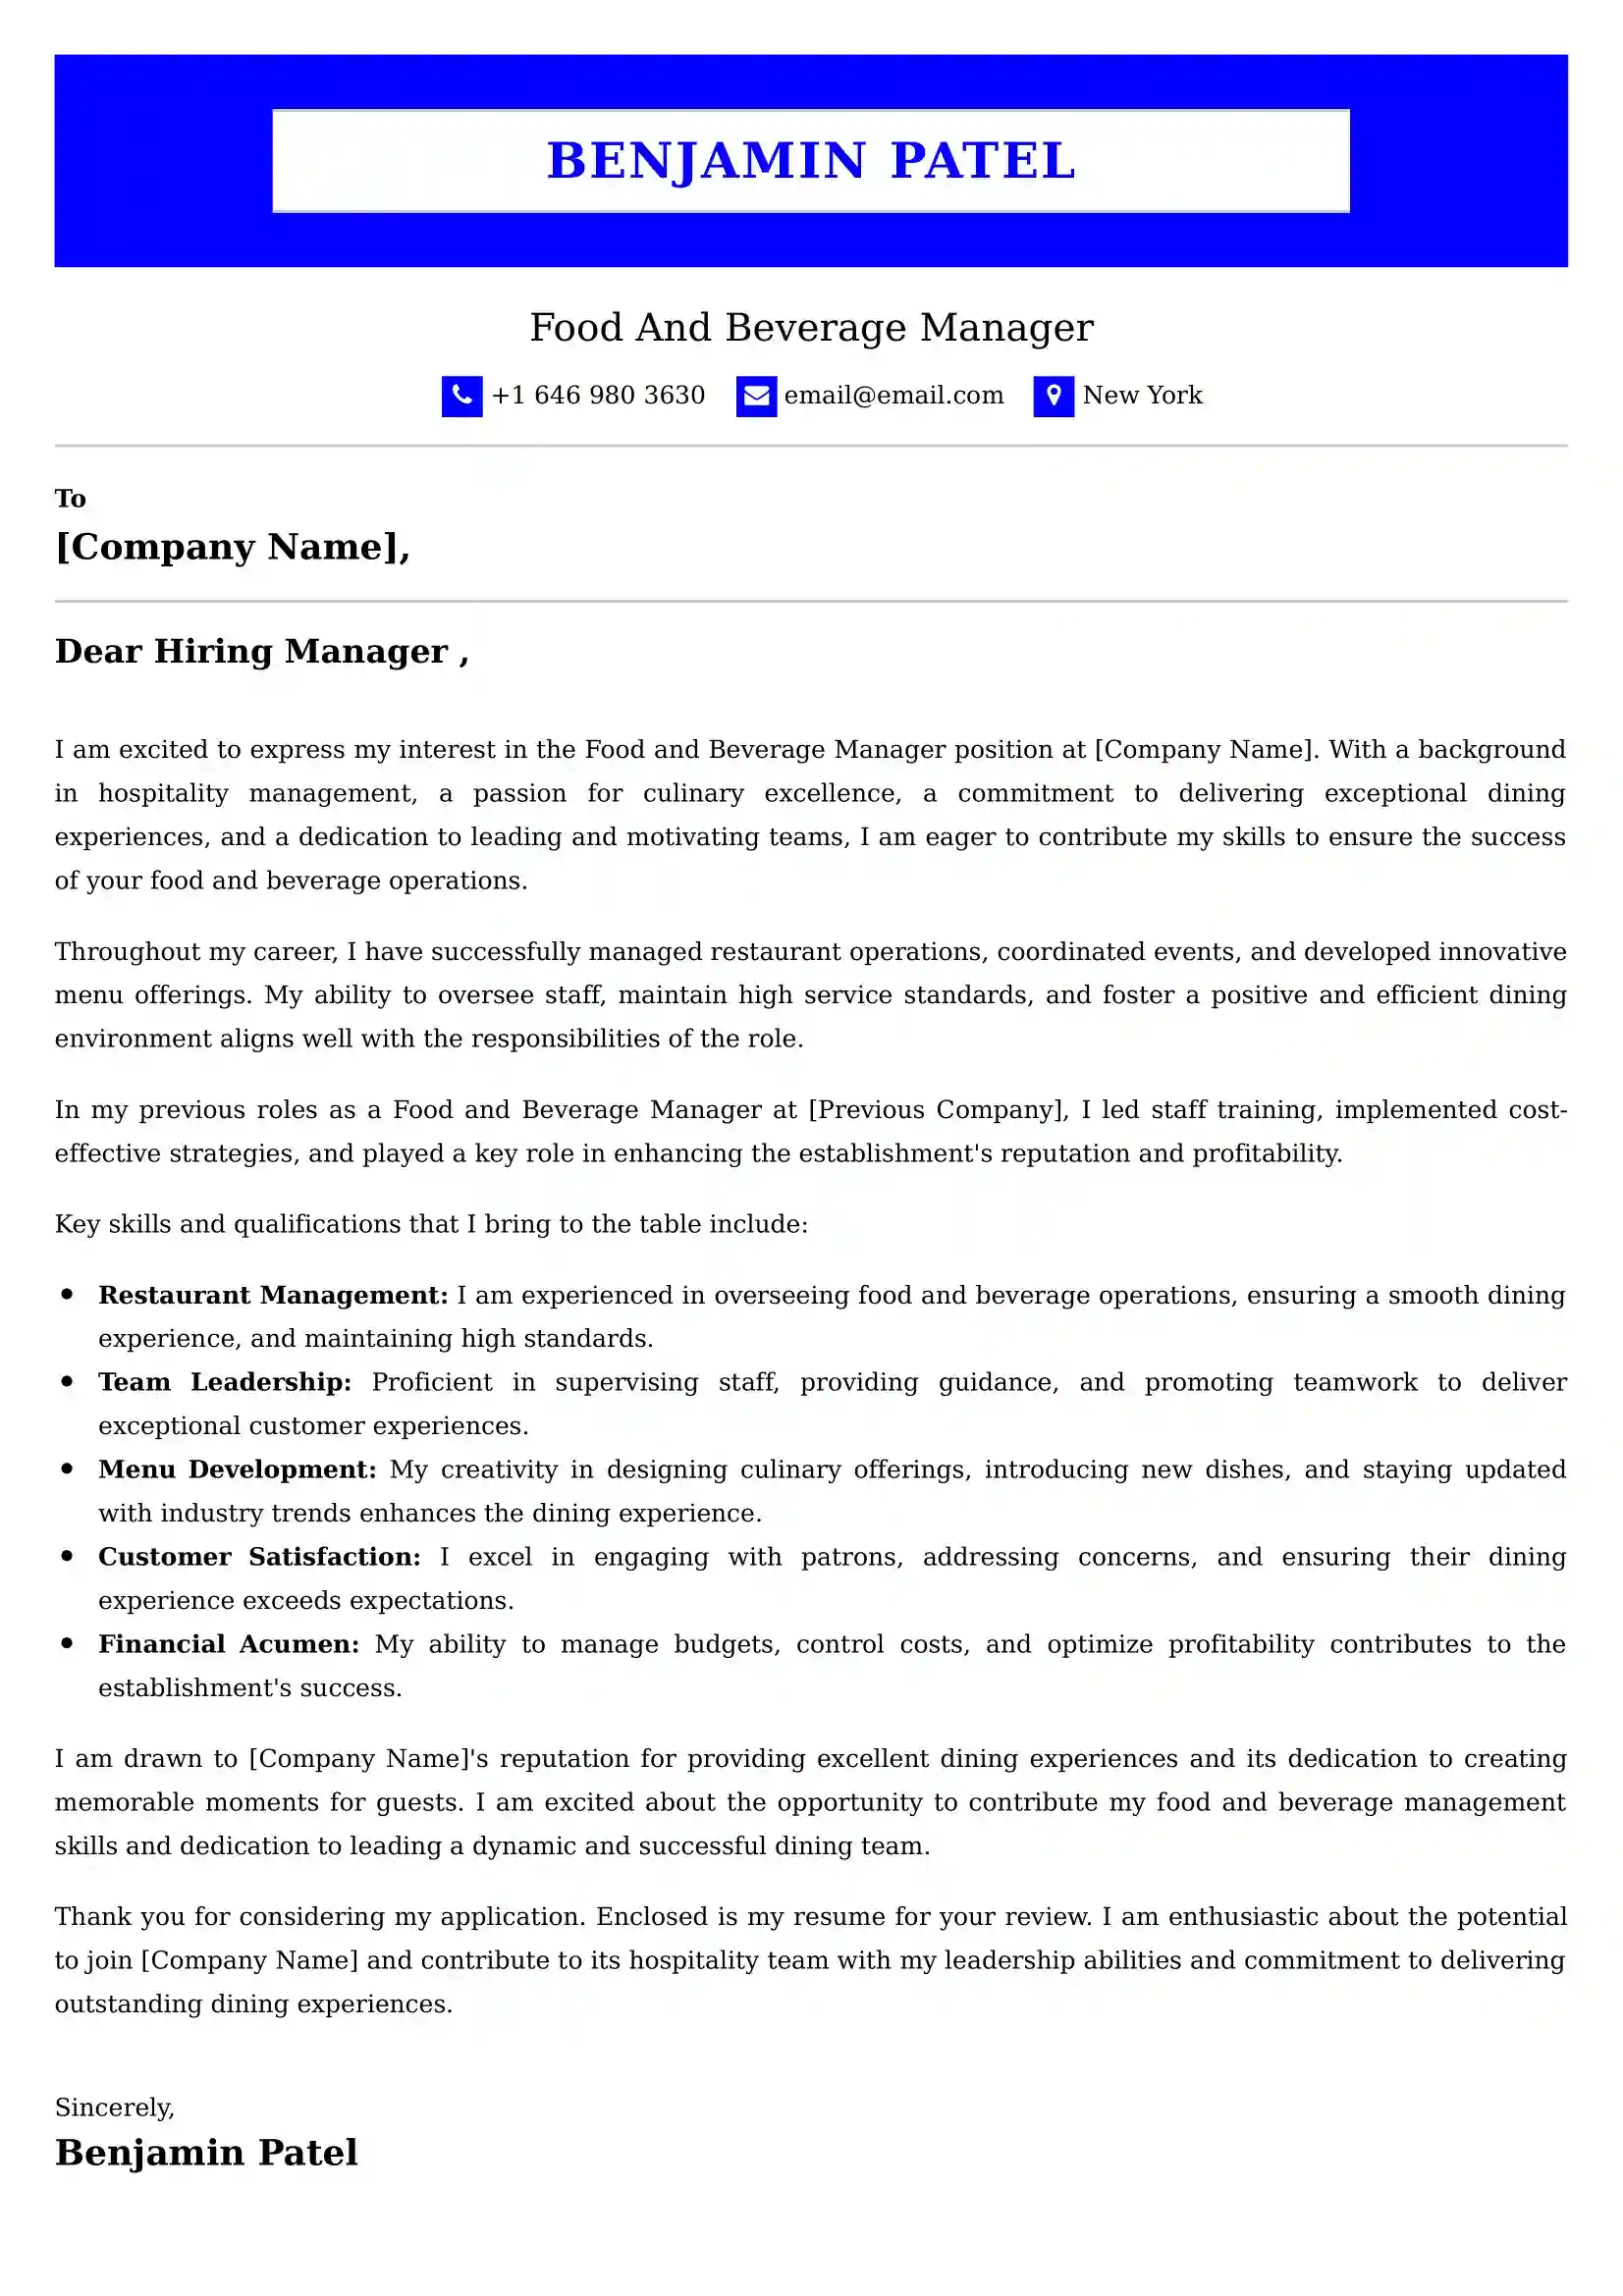 Food And Beverage Server Cover Letter Examples Australia